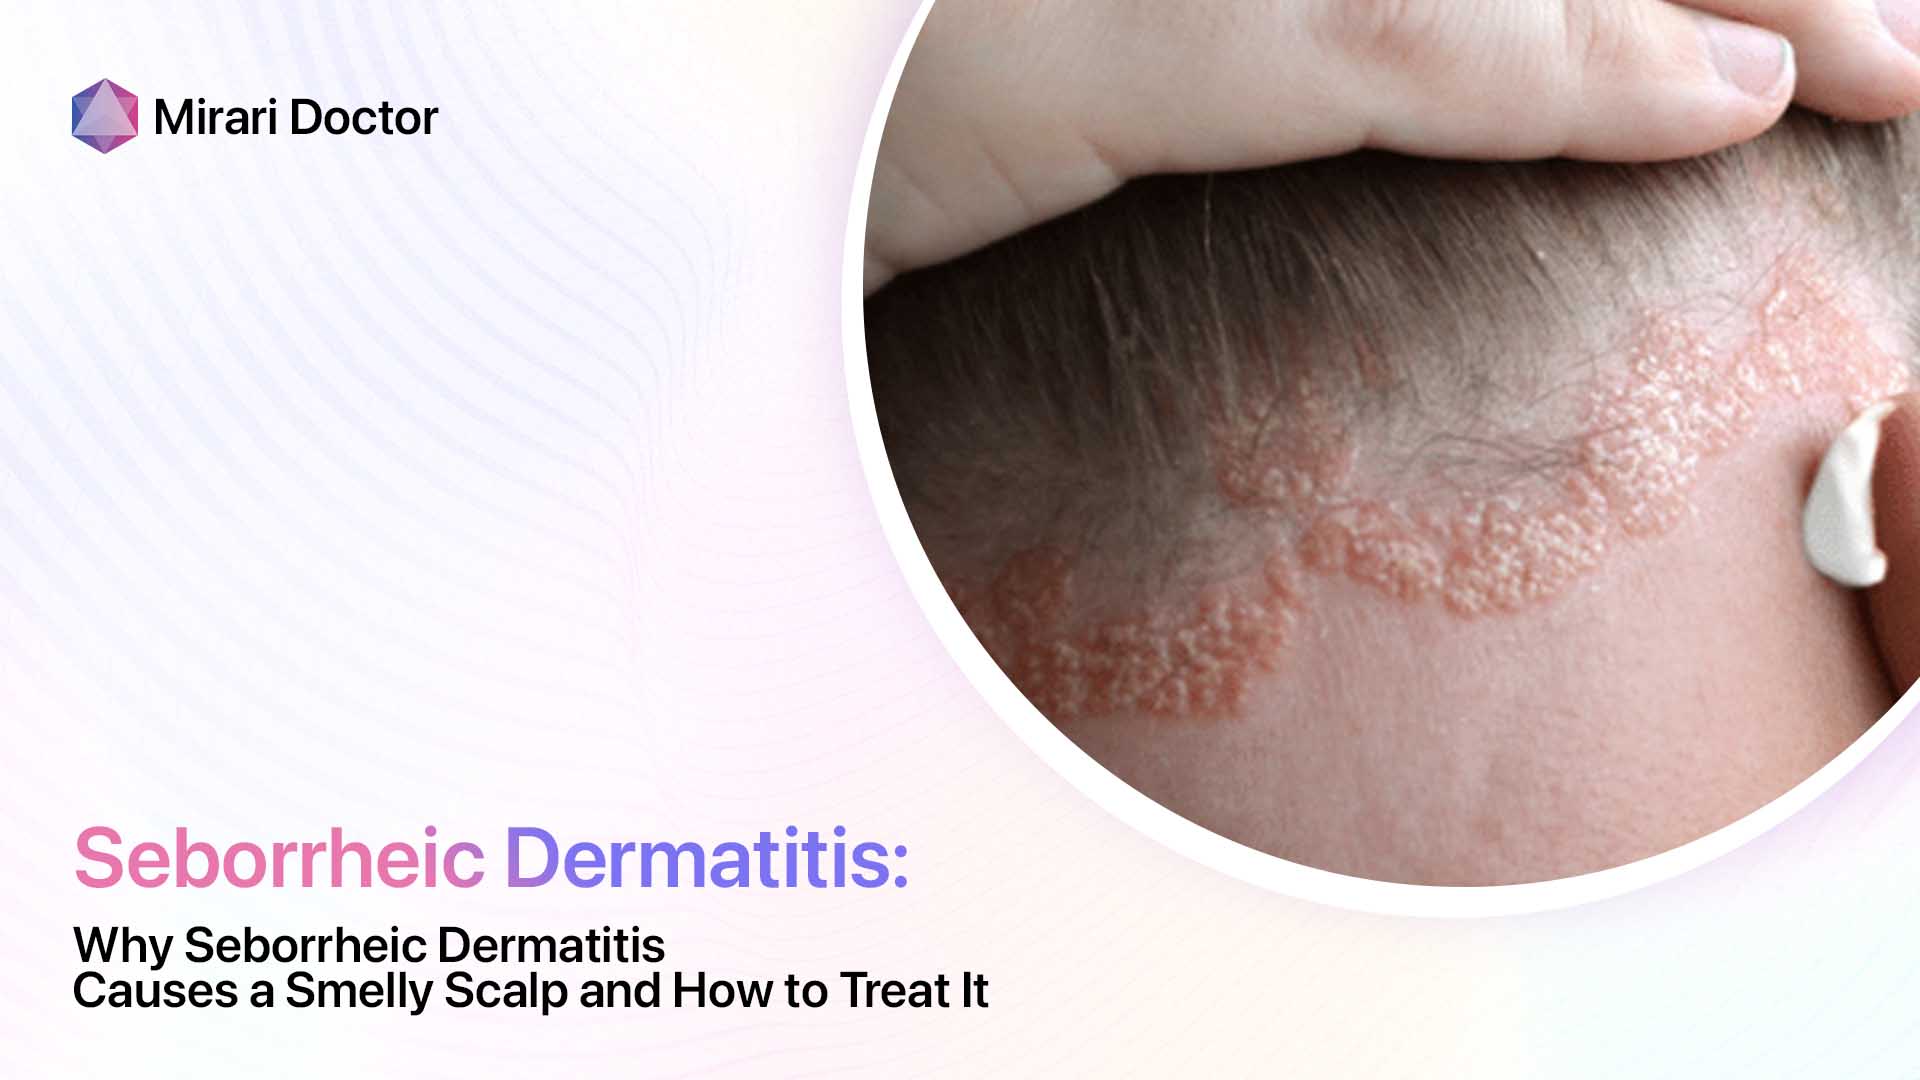 Featured image for “Why Seborrheic Dermatitis Causes a Smelly Scalp and How to Treat It”